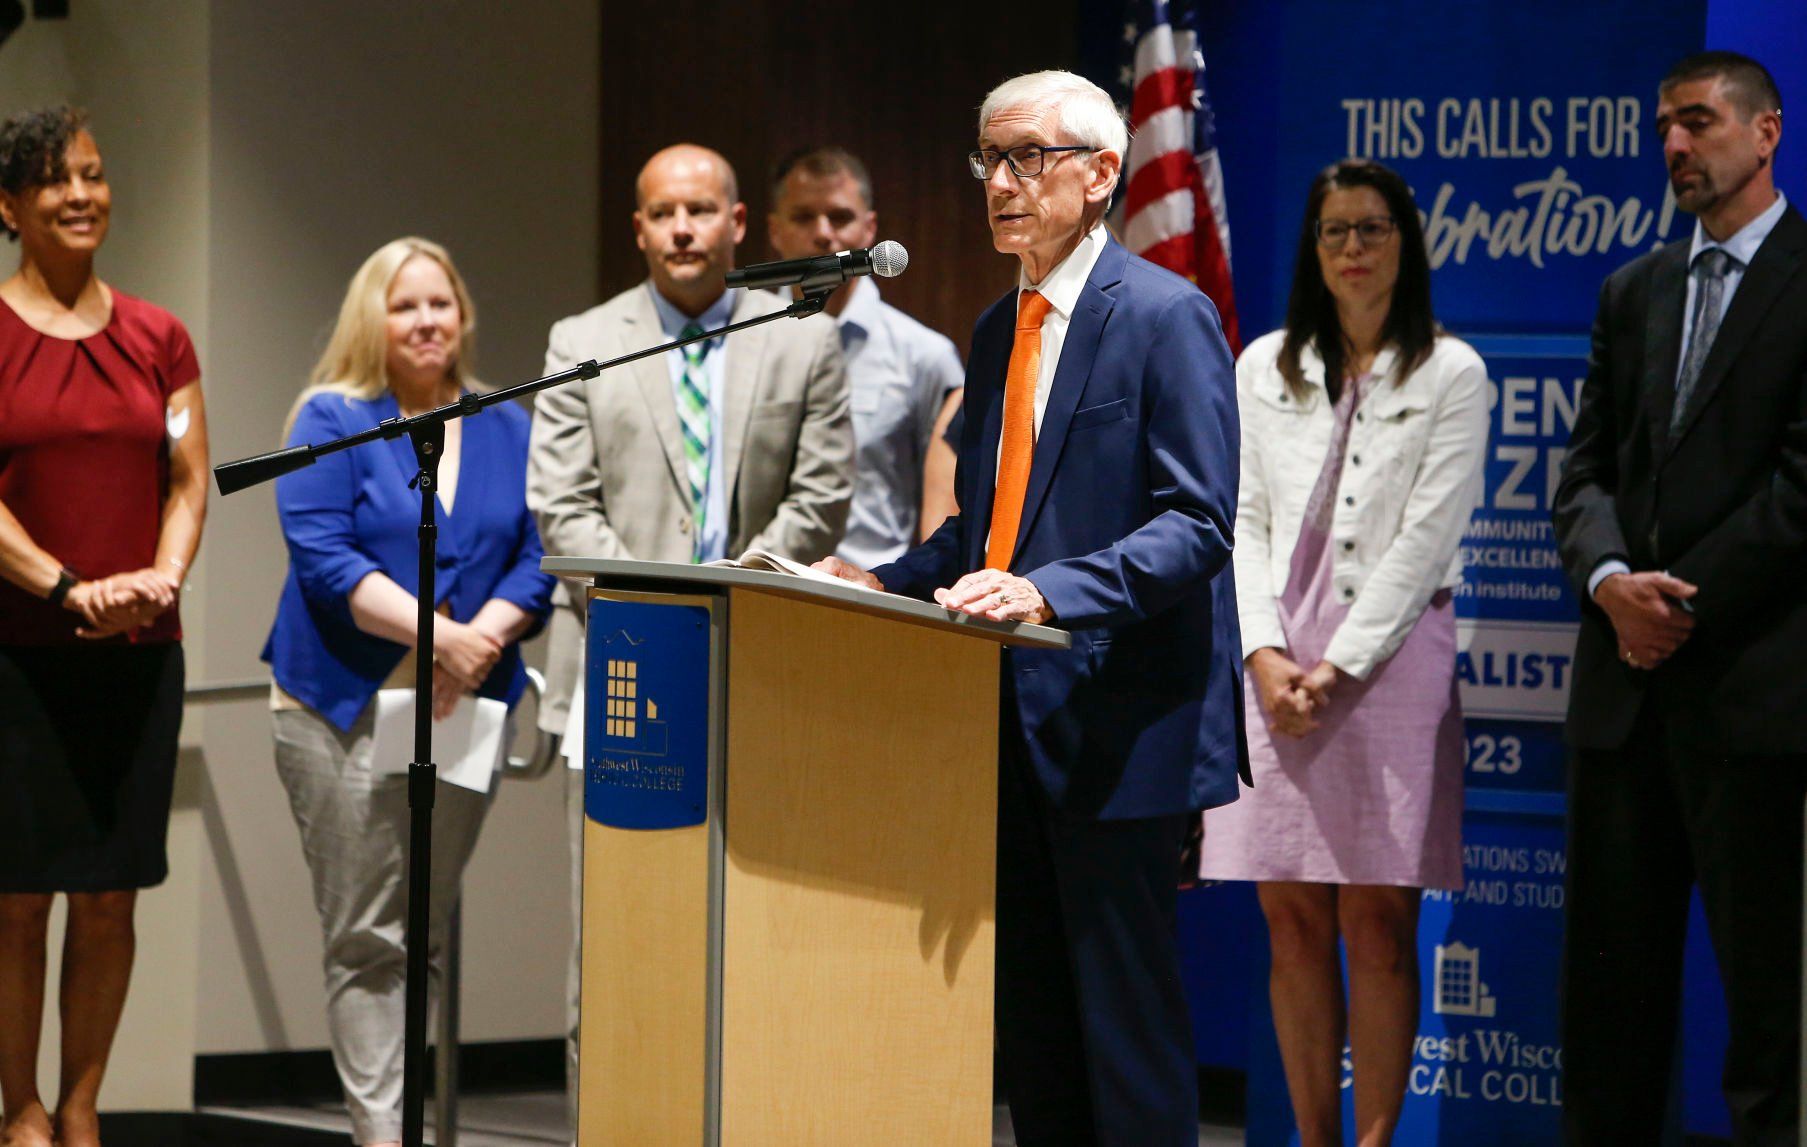 Wisconsin Gov. Tony Evers announces $2.9 million in grant funding for workforce development efforts at Southwest Wisconsin Technical College in Fennimore, Wis., on Thursday, June 23, 2022..    PHOTO CREDIT: Dave Kettering